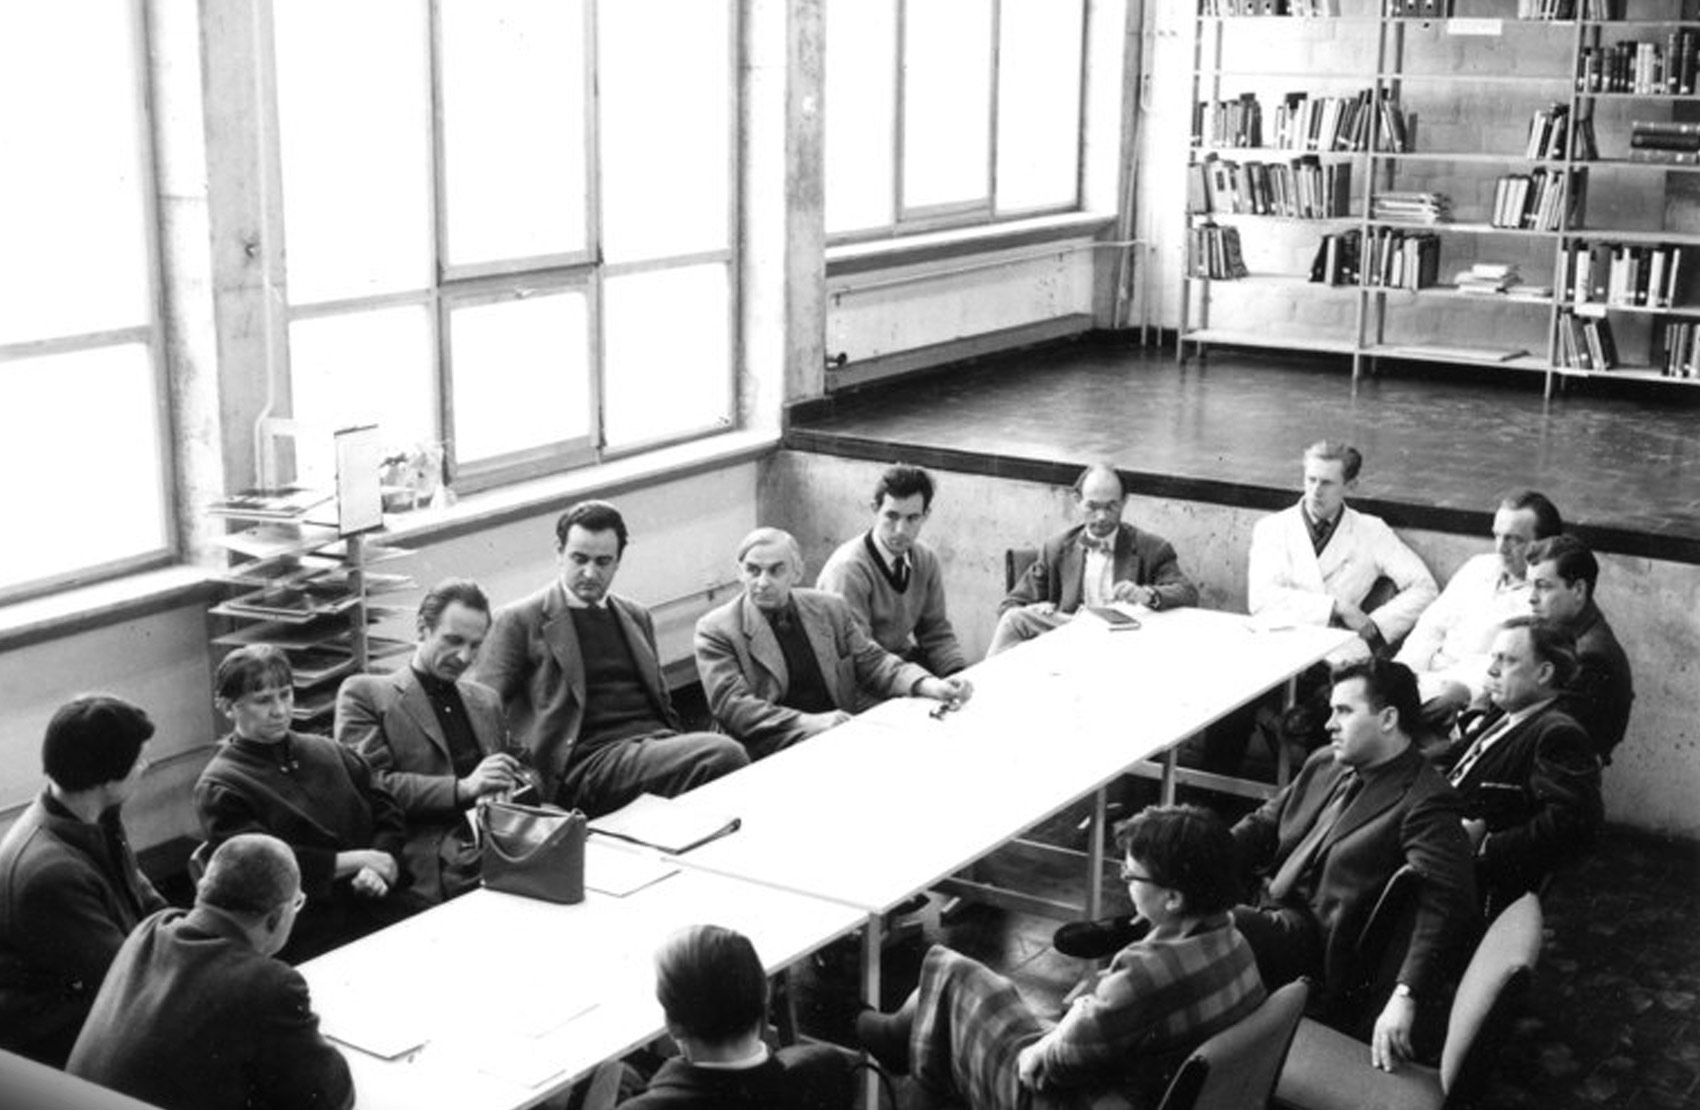 Faculty meeting in the library, 1955